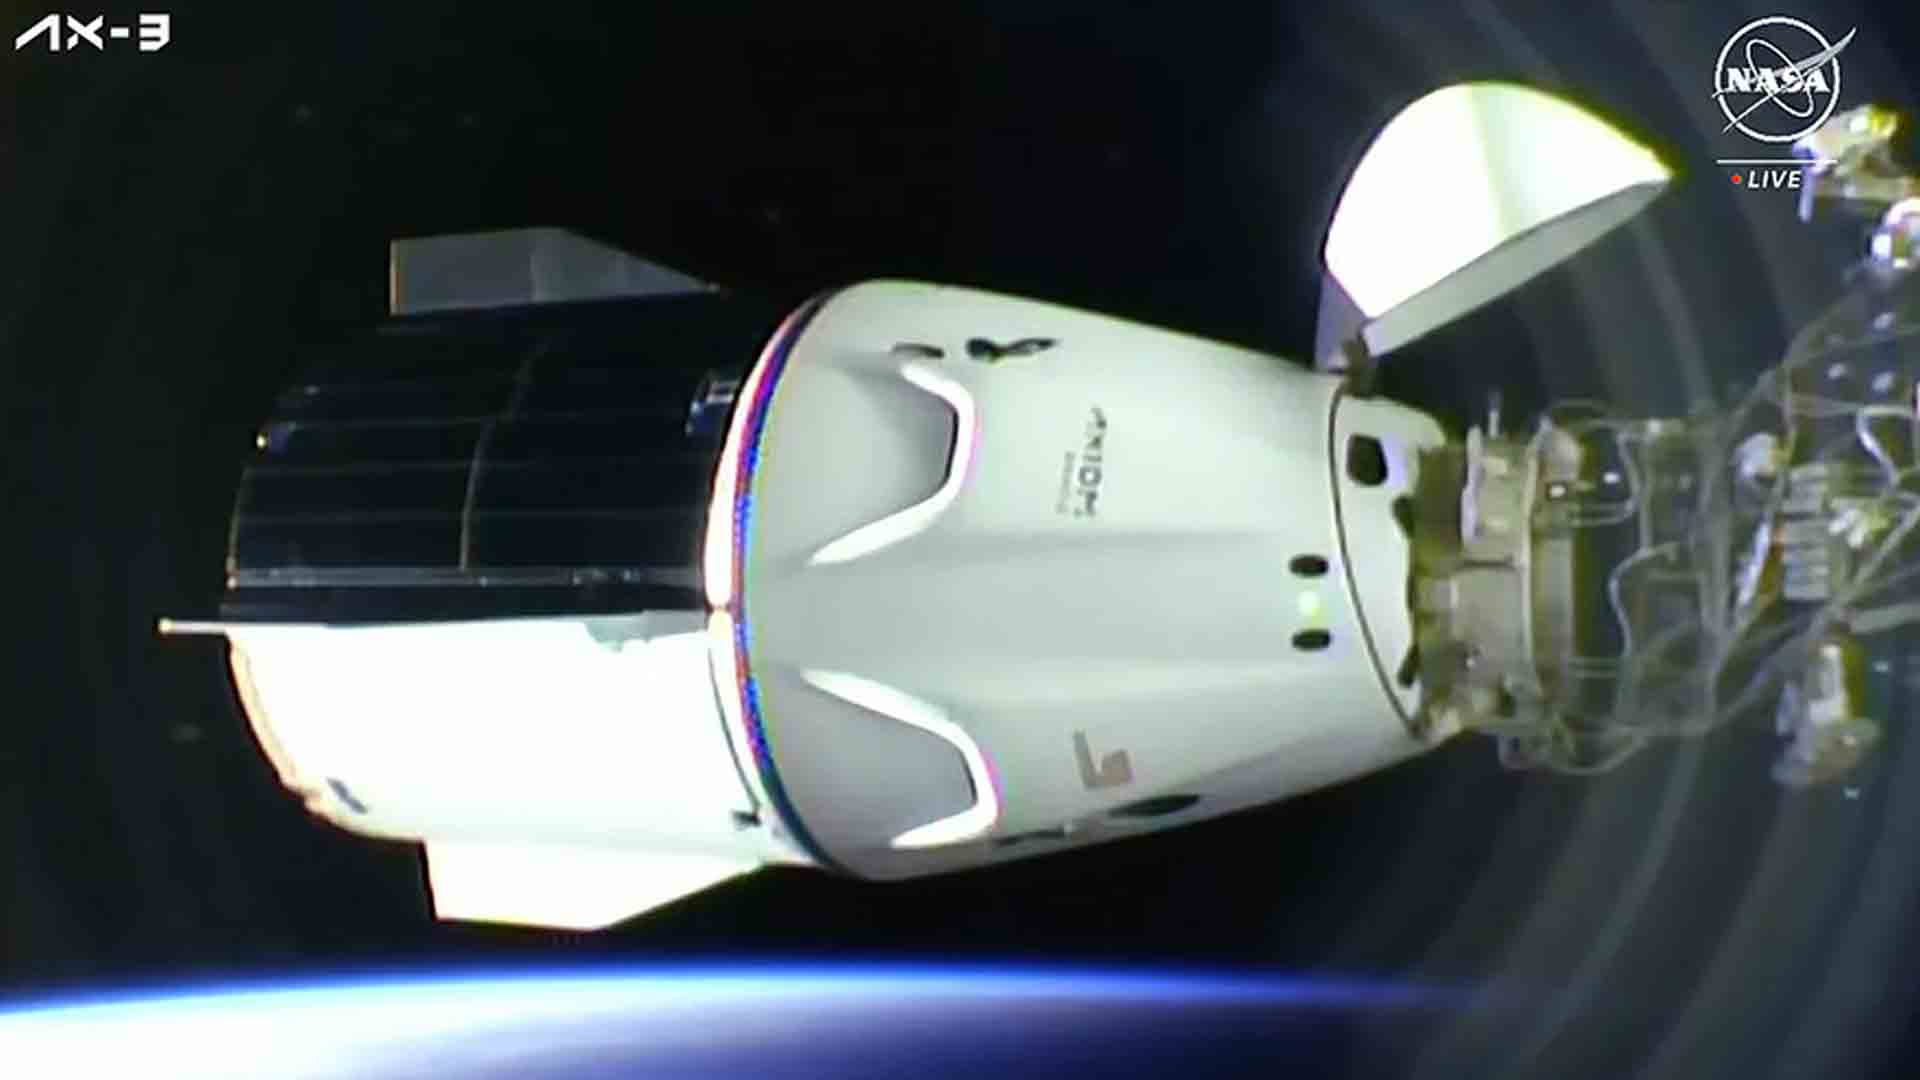 Dragon Spacecraft docked at International Space Station (ISS) with Ax-3 astronauts